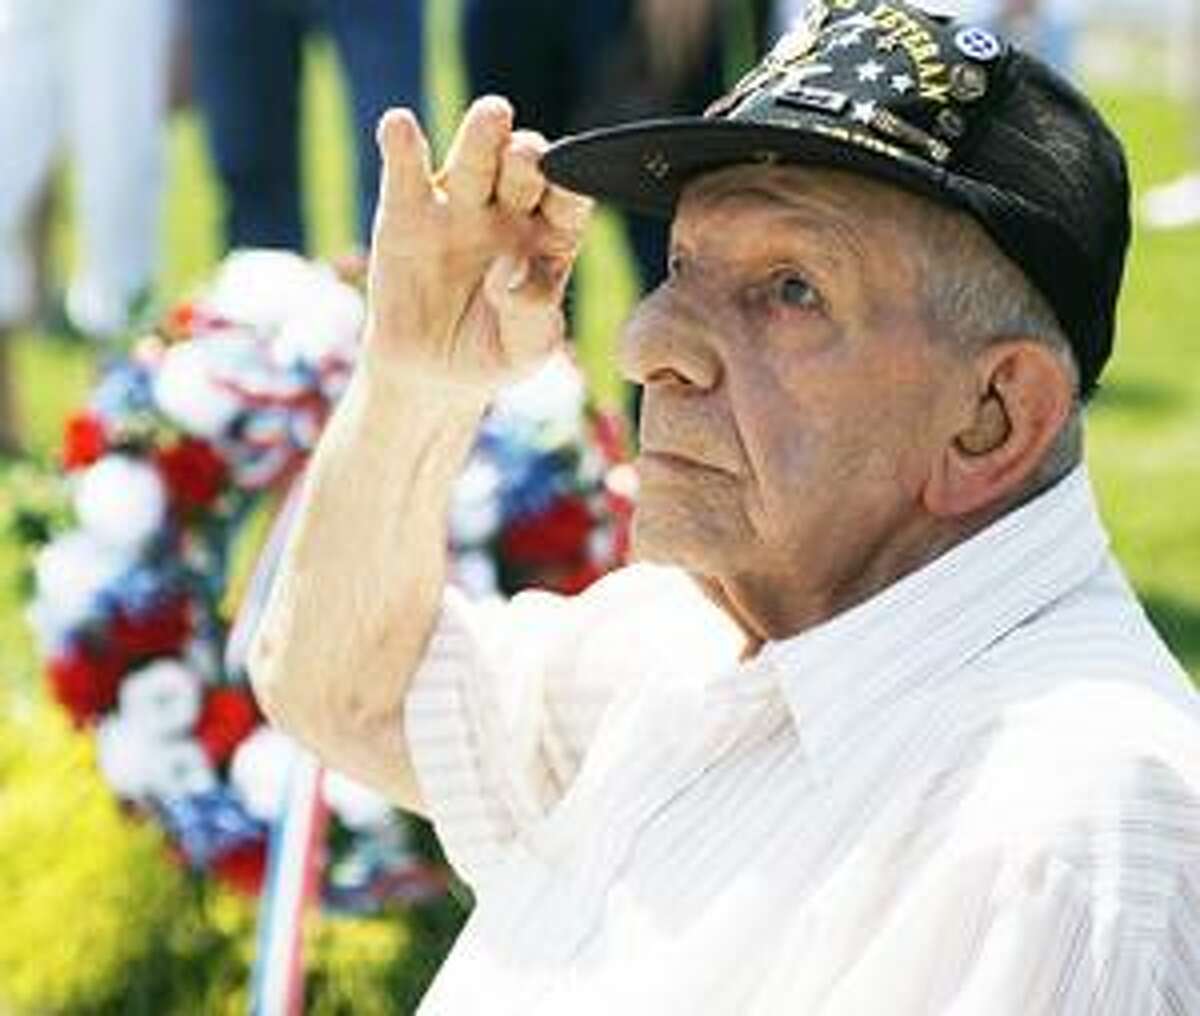 Dispatch Staff Photo by JOHN HAEGER World War II veteran Sylvester Ciotti salutes during the playing of Taps during the annual Memorial Day service in the Town of Vernon on Monday, May 30, 2011.